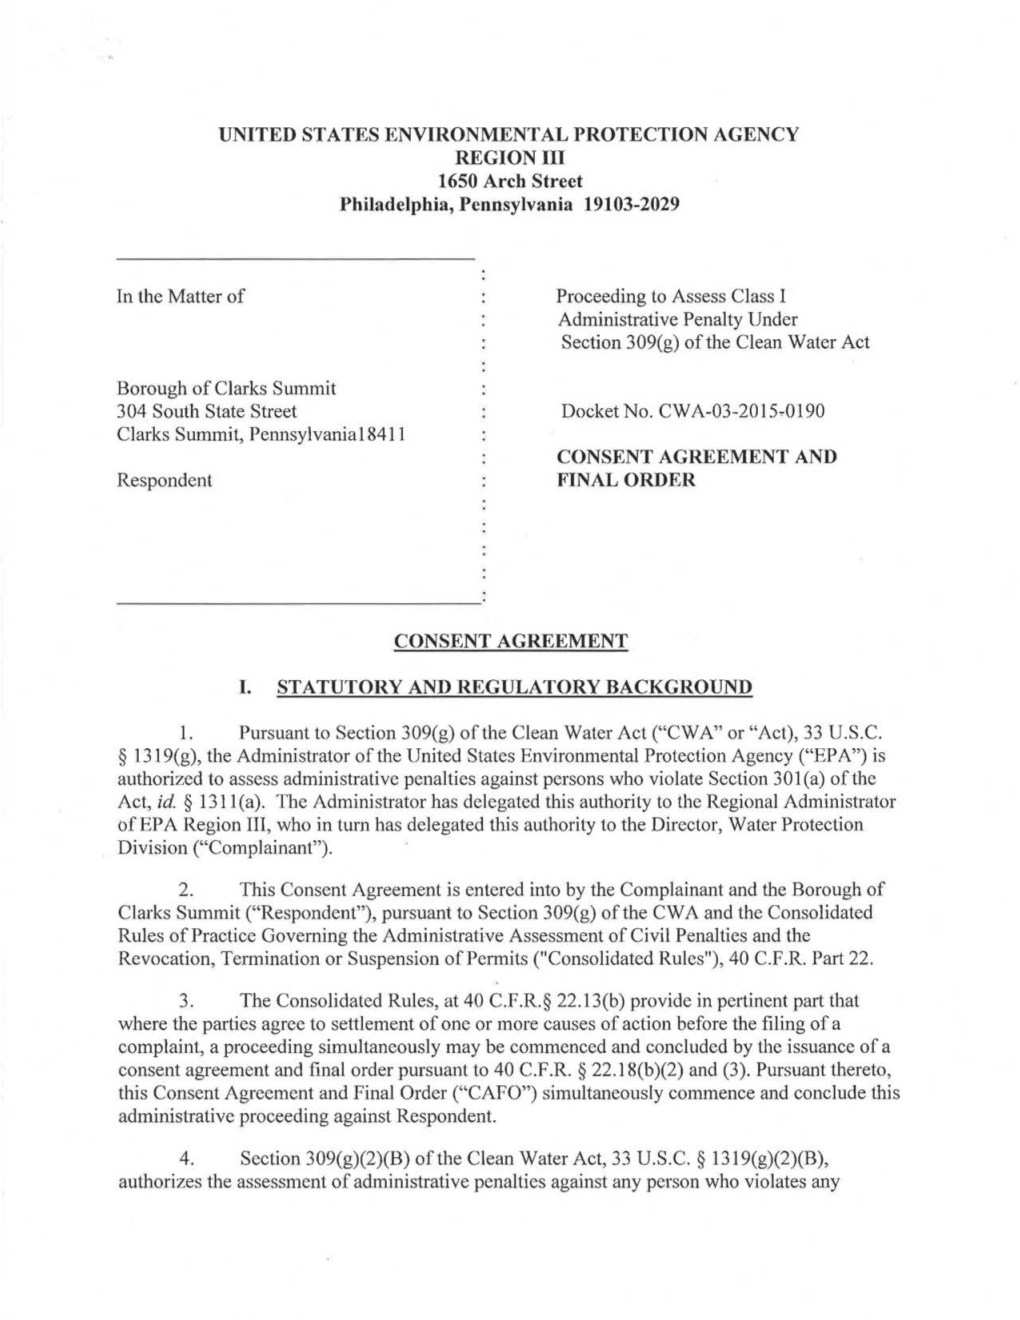 Clarks Summit Consent Agreement and Final Order